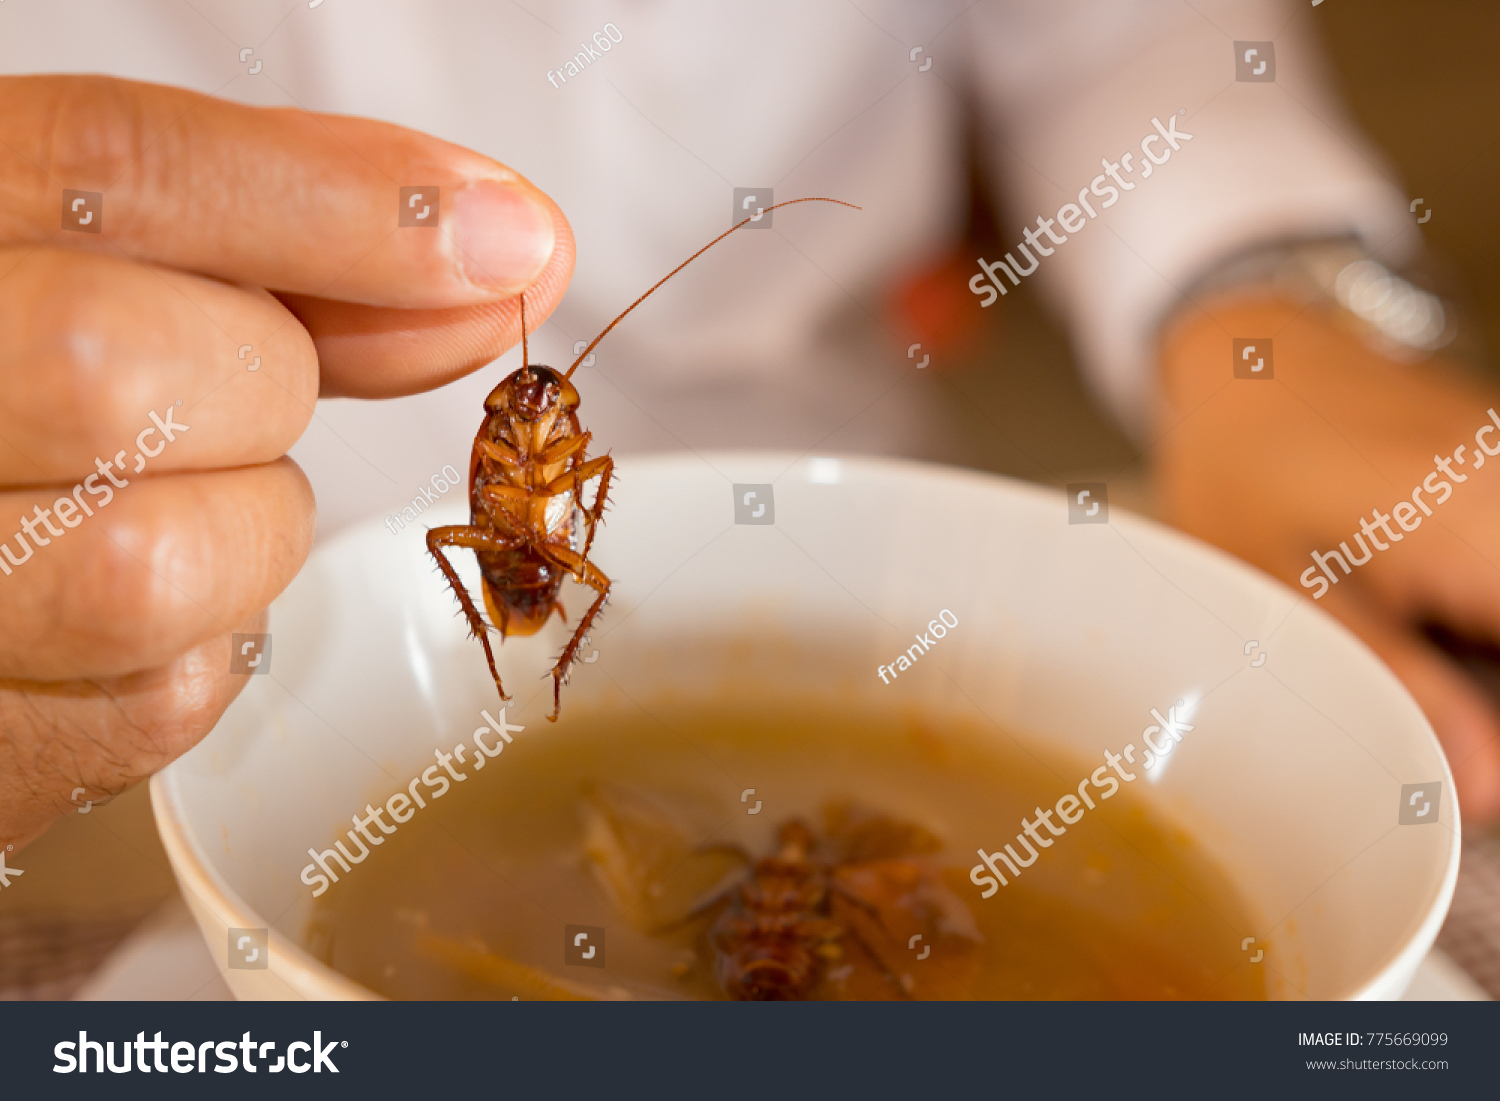 Cockroach in hand take up from soup,Contaminant bacteria food risk of food poisoning
 #775669099